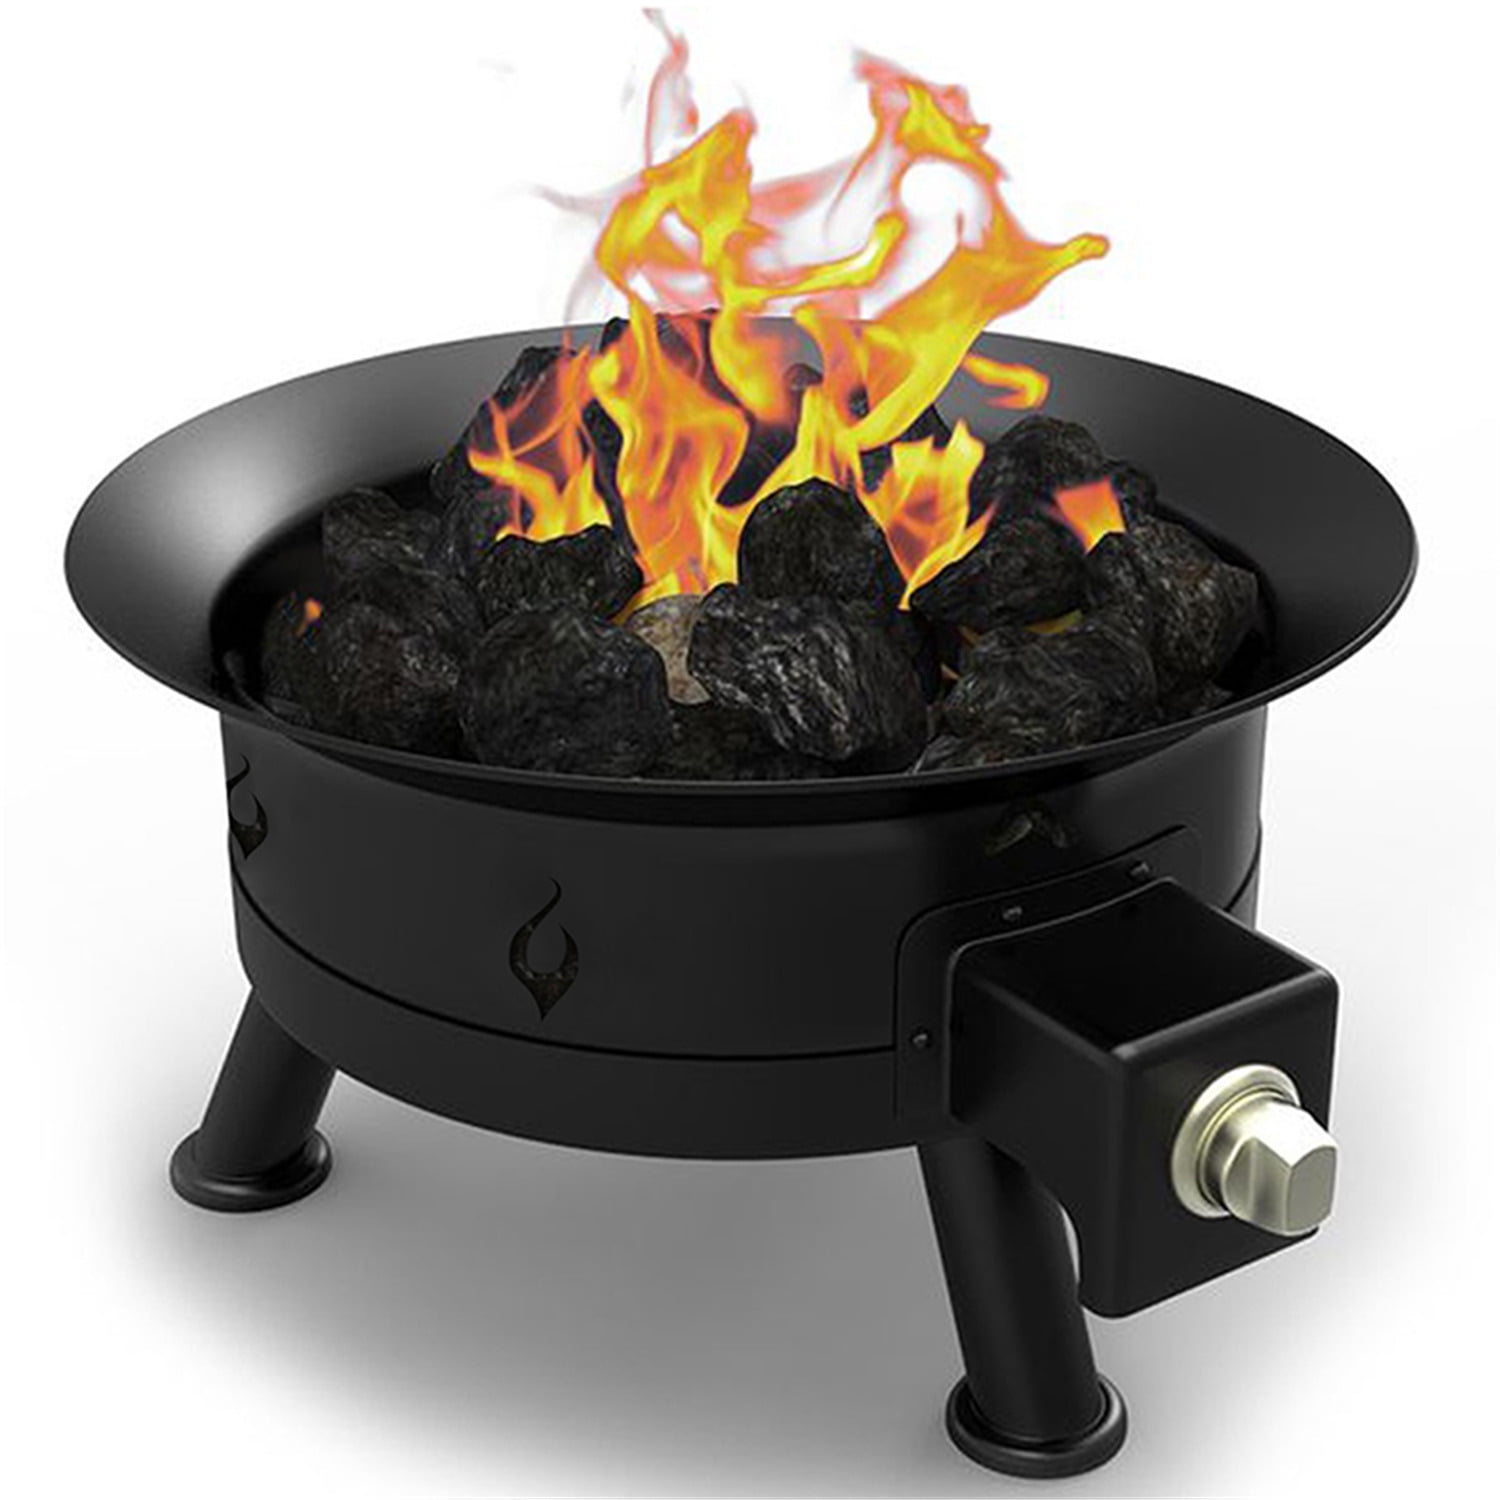 Regal Flame 24 Inch Camp Mate 58 000 Btu Portable Propane Outdoor Fire Pit Perfect For Rv Camping And Outdoor Fireplace No Need For Firewood Racks Covers Fire Rings Gas Logs Firebowl Walmart Com